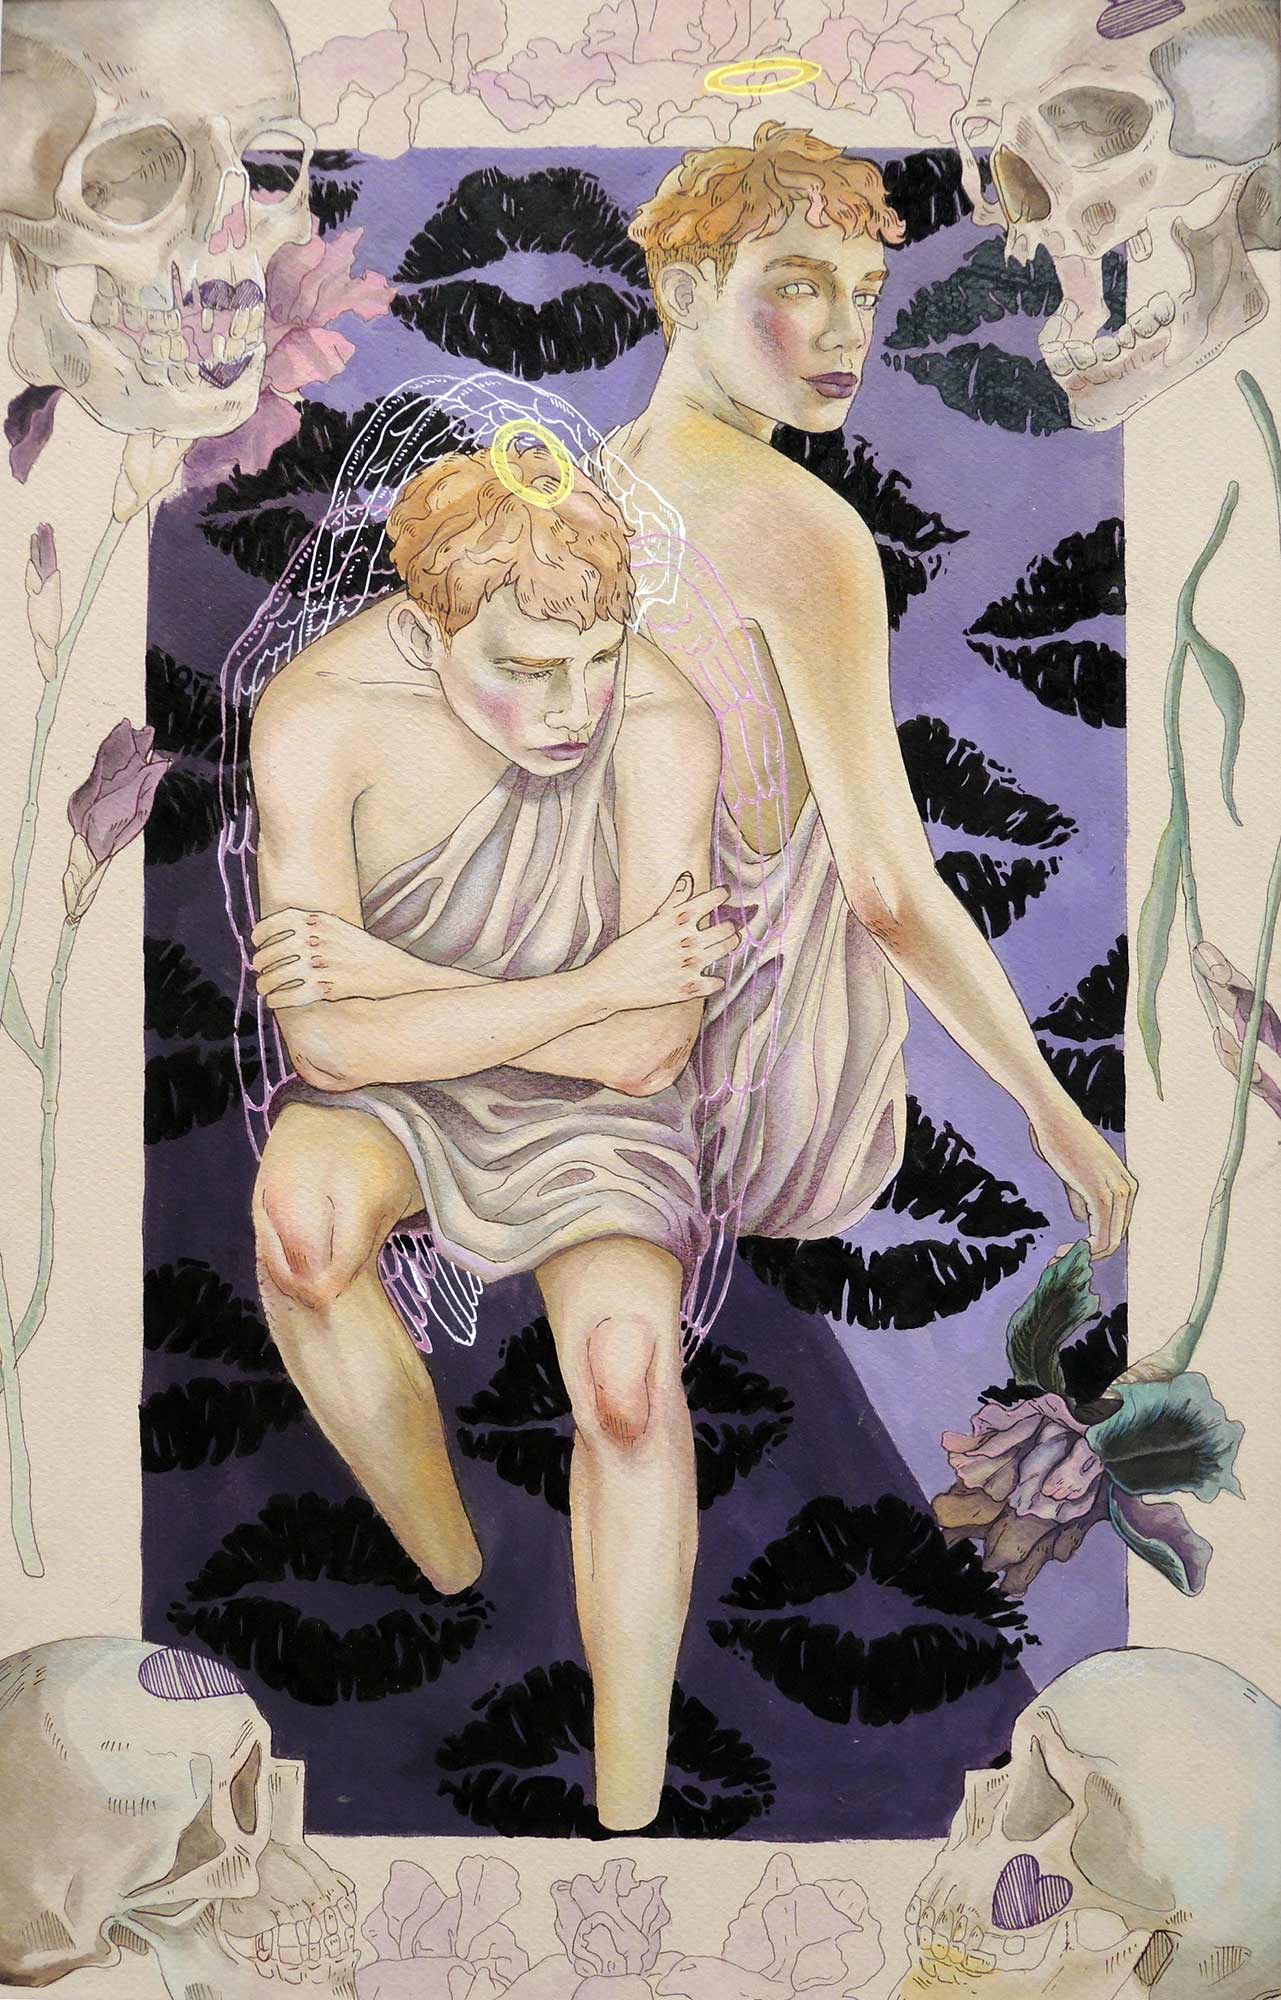 An illstration of two young individuals in draped cloth